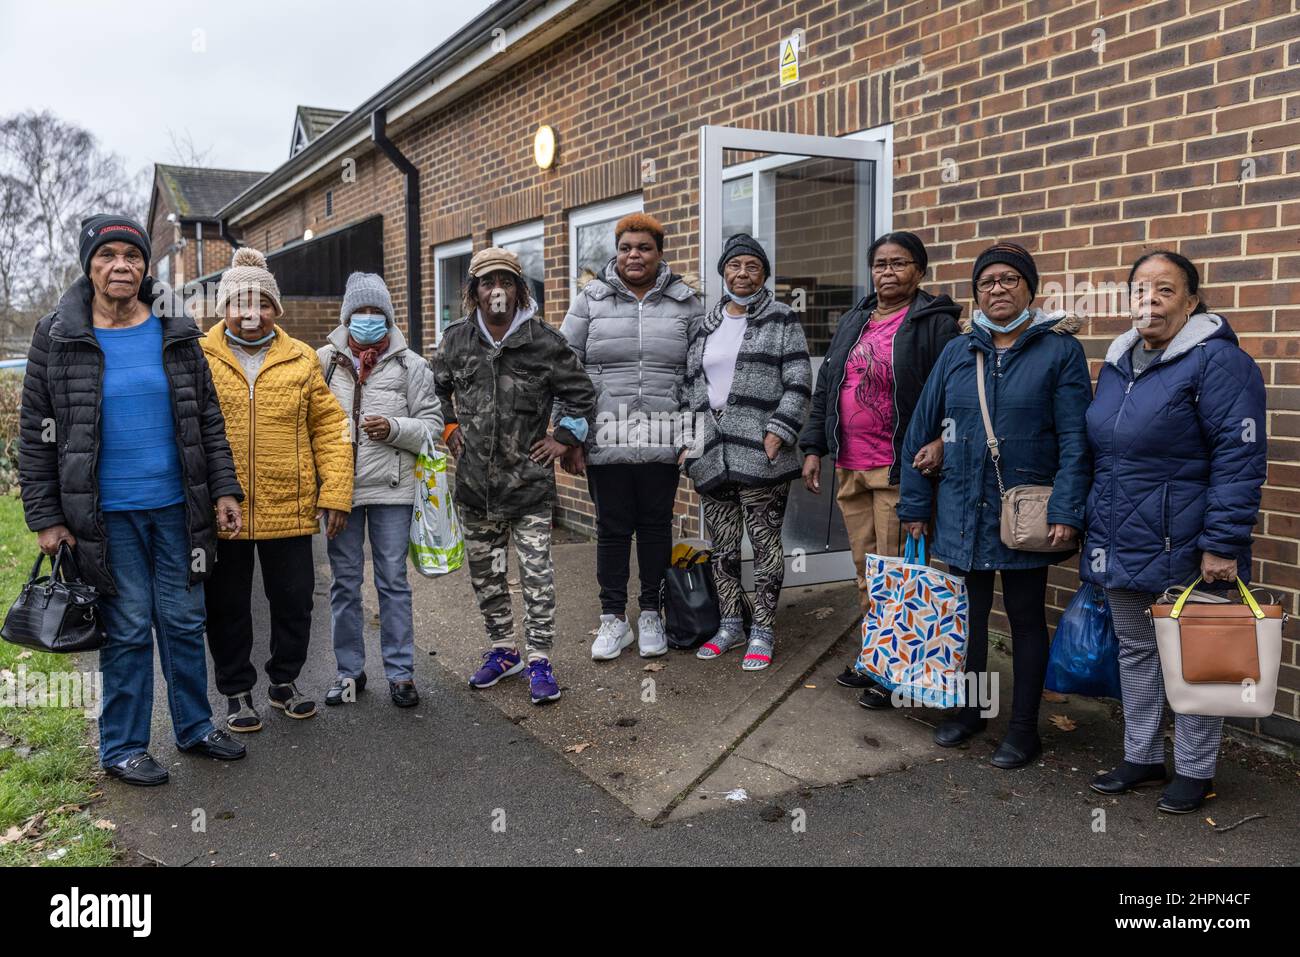 Exiles from Chagos Islands inside Broadfield Community Centre, together they gather in the community hall in Sussex to reminisce about home. Stock Photo